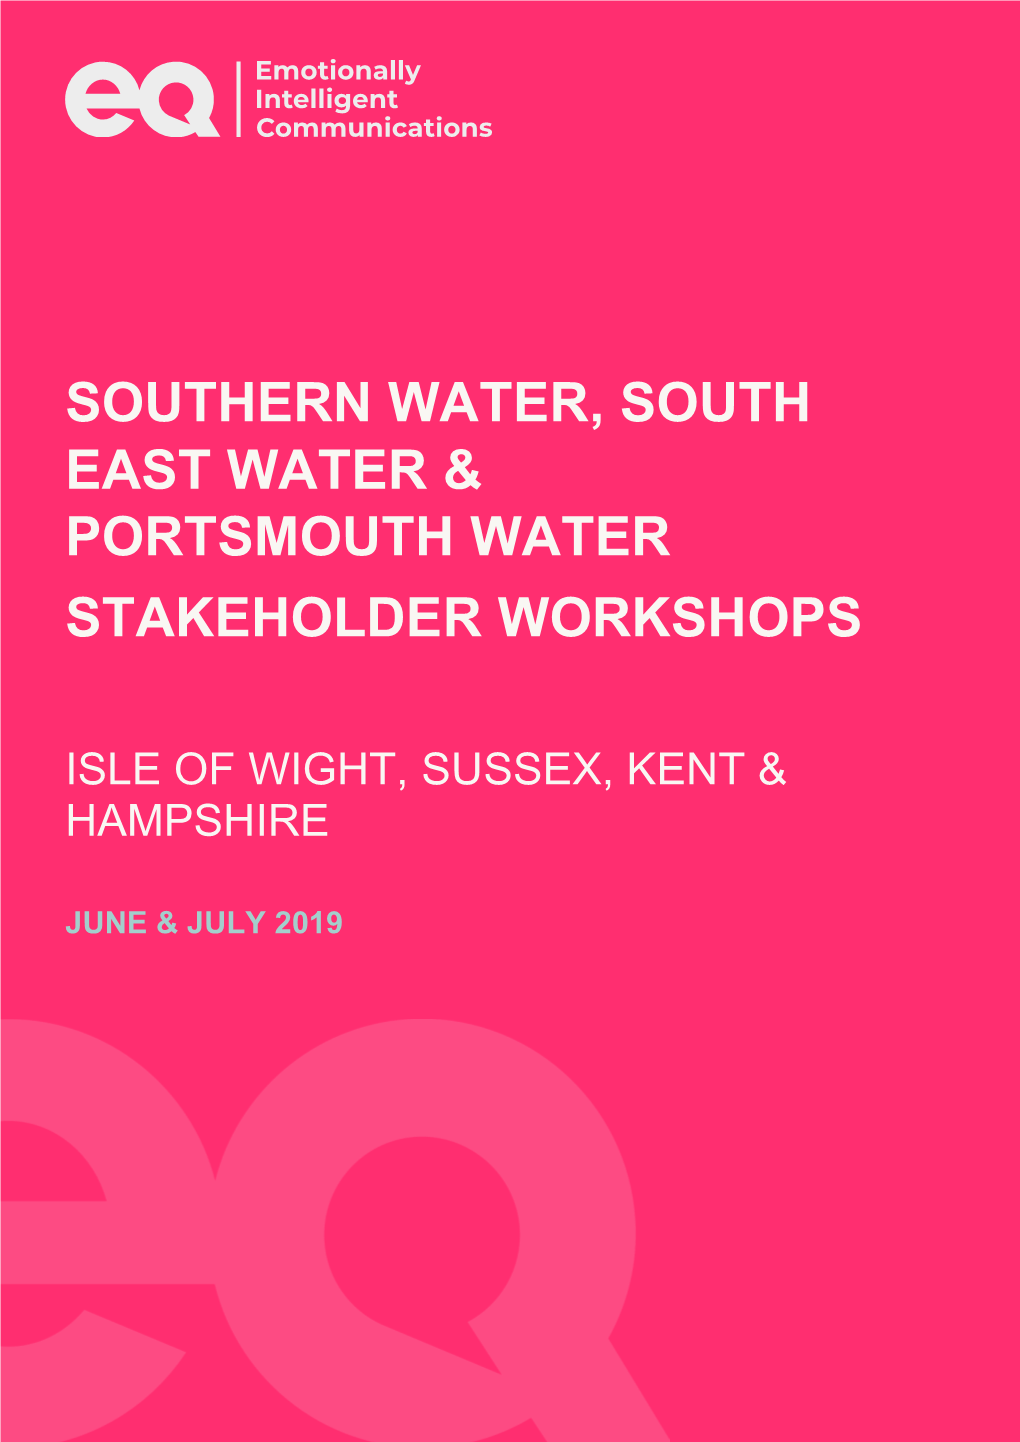 Southern Water, South East Water & Portsmouth Water